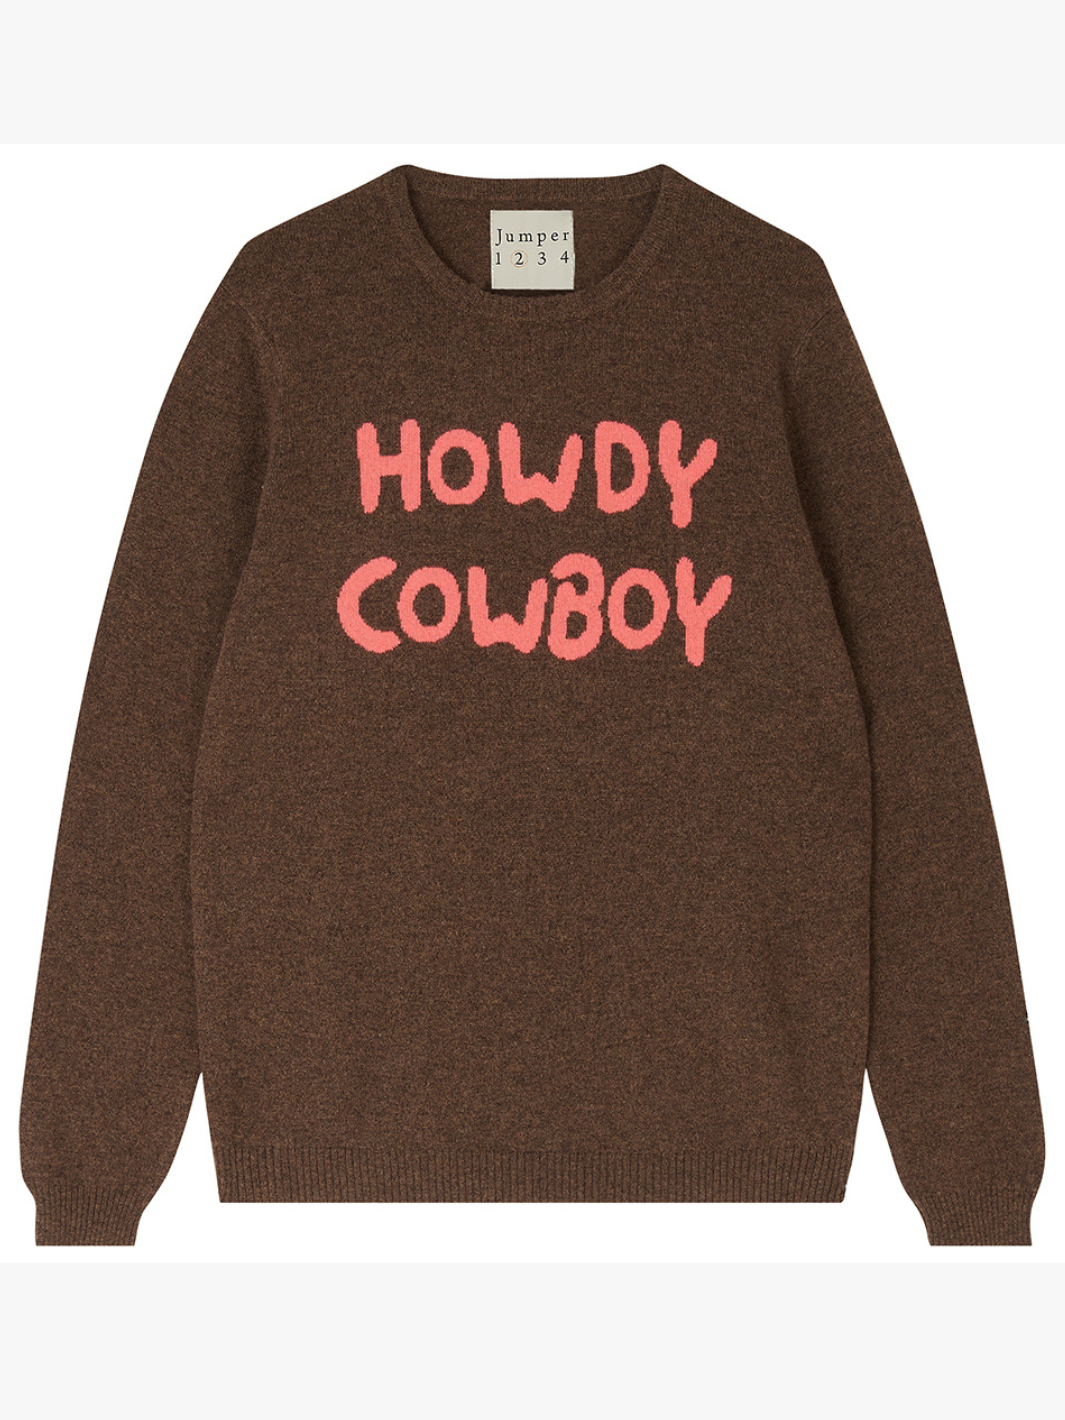 HOWDY COWBOY IN MULL FLAME - Romi Boutique